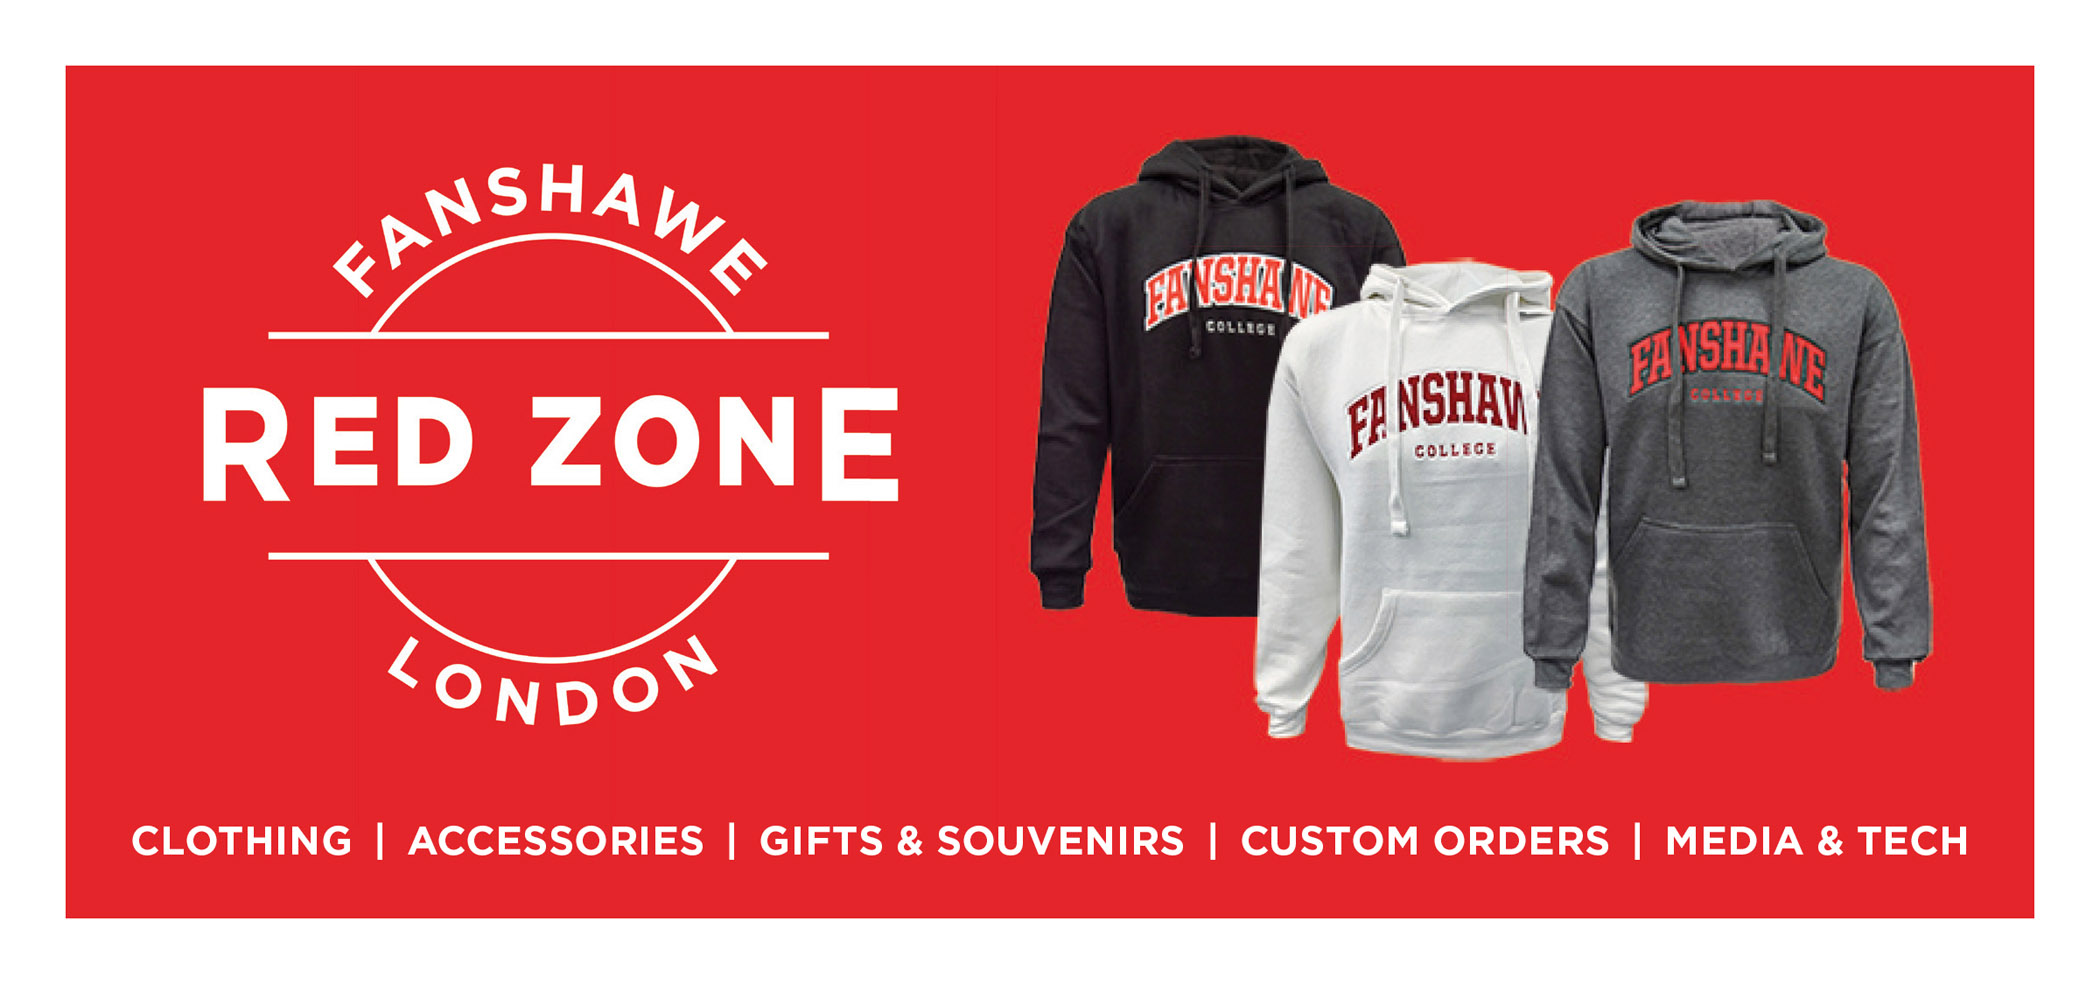 $5 off a Fanshawe classic hoodie at Red Zone